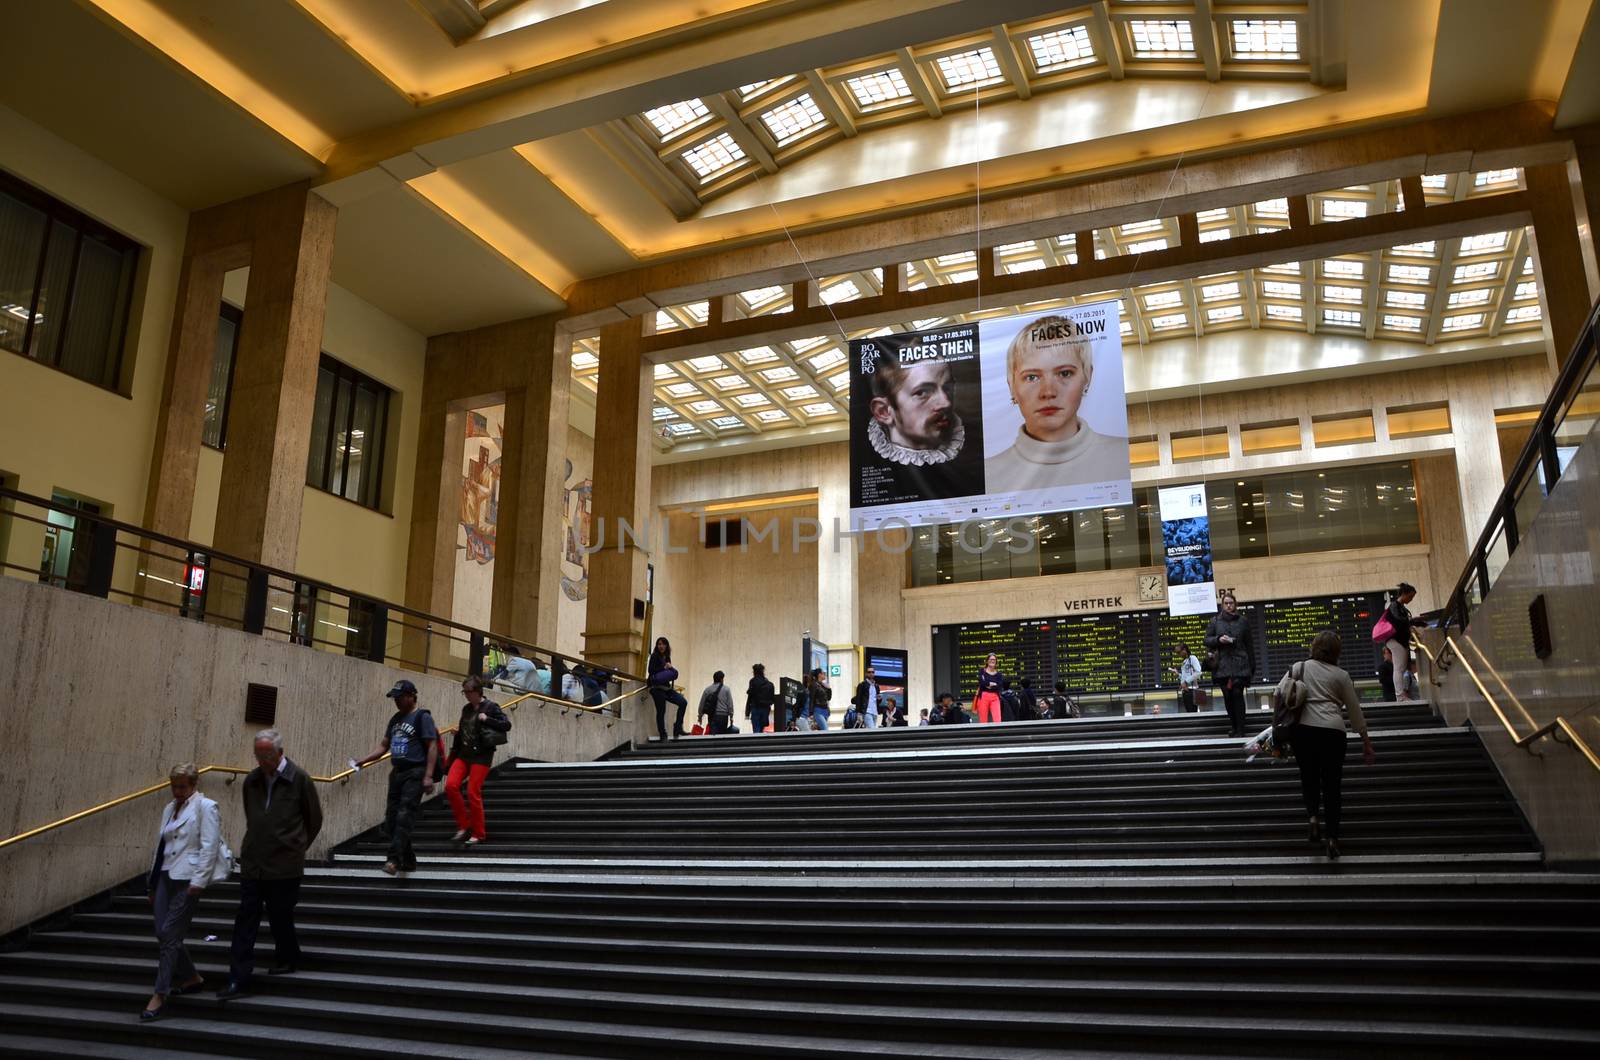 Brussels, Belgium - May 12, 2015: Travellers in the main lobby of Brussels Central Train Station by siraanamwong